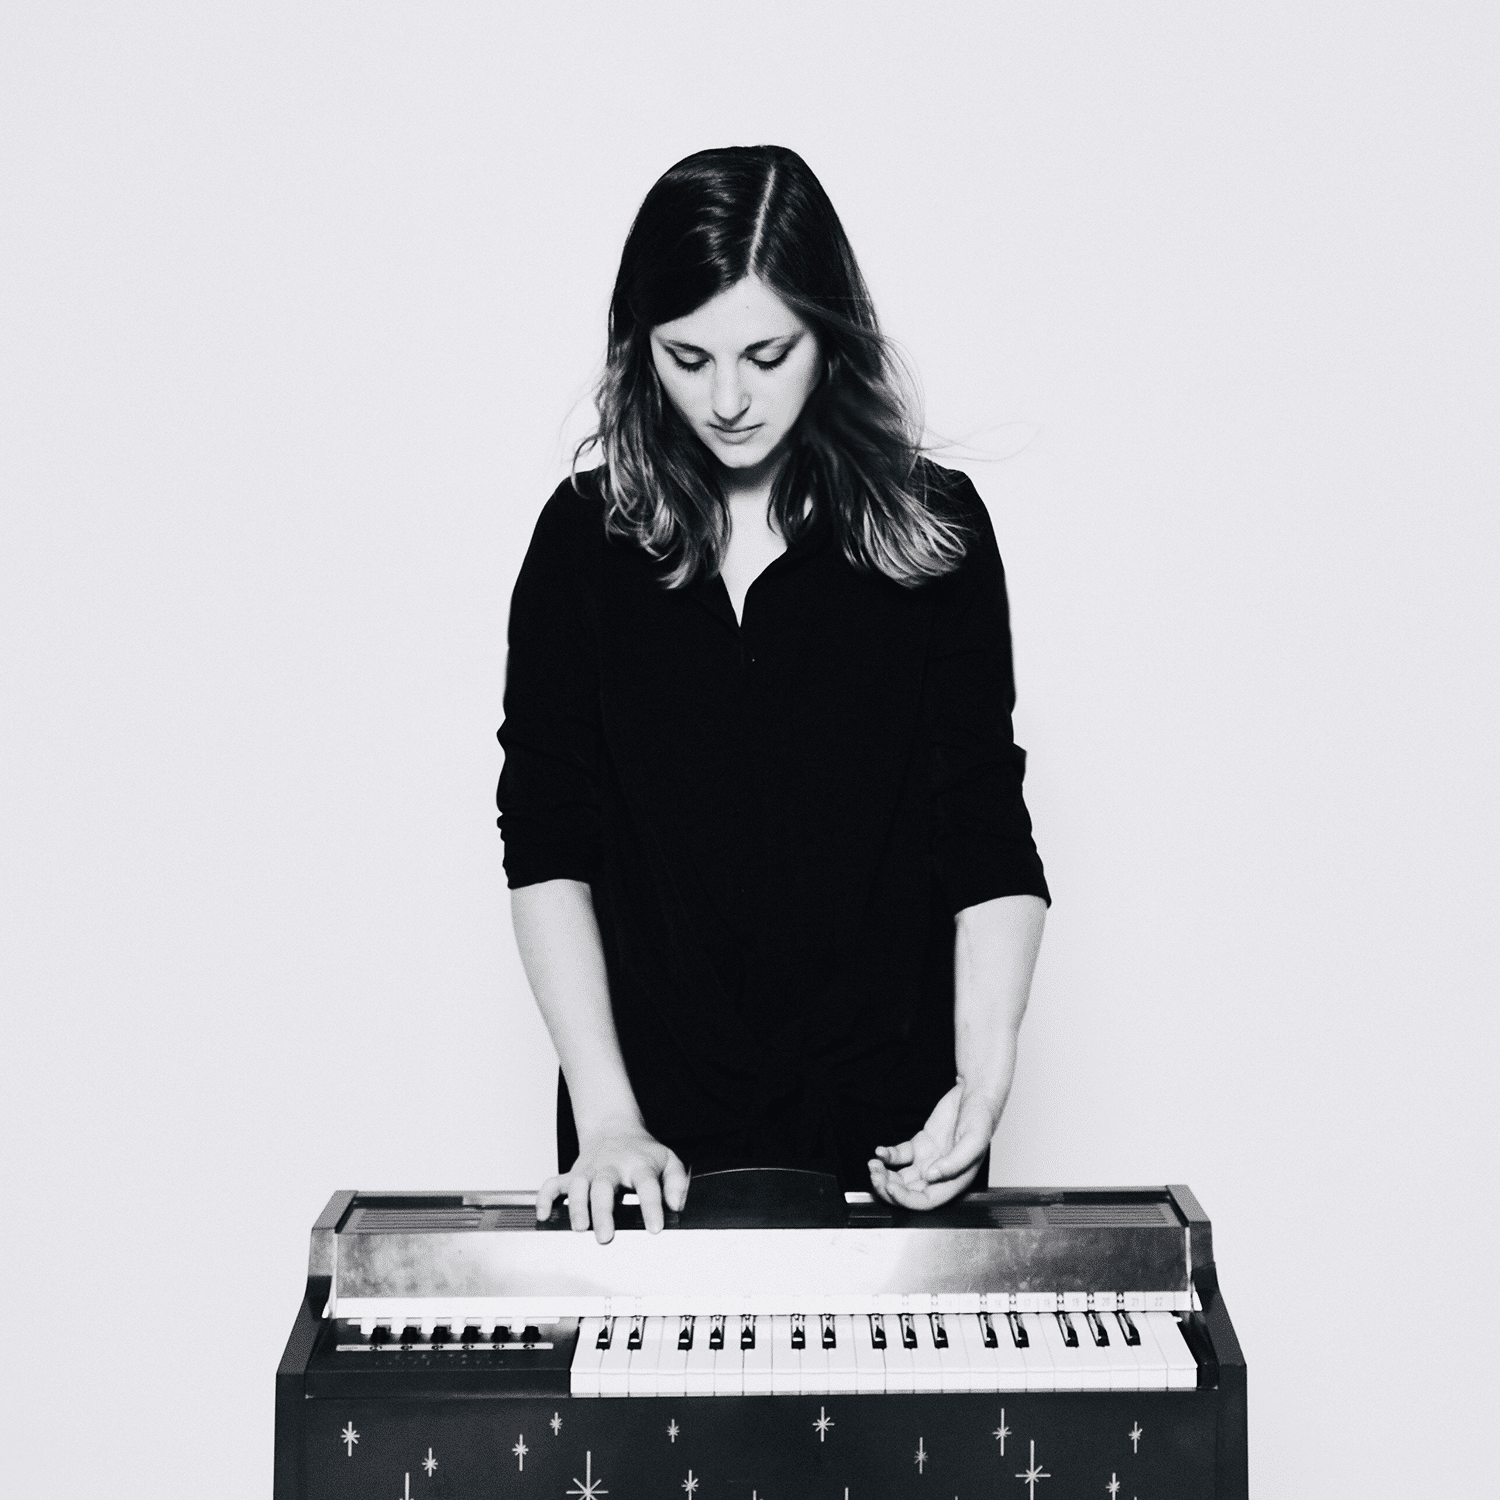 Photo of Molly Joyce standing behind the keyboard of a musical instrument